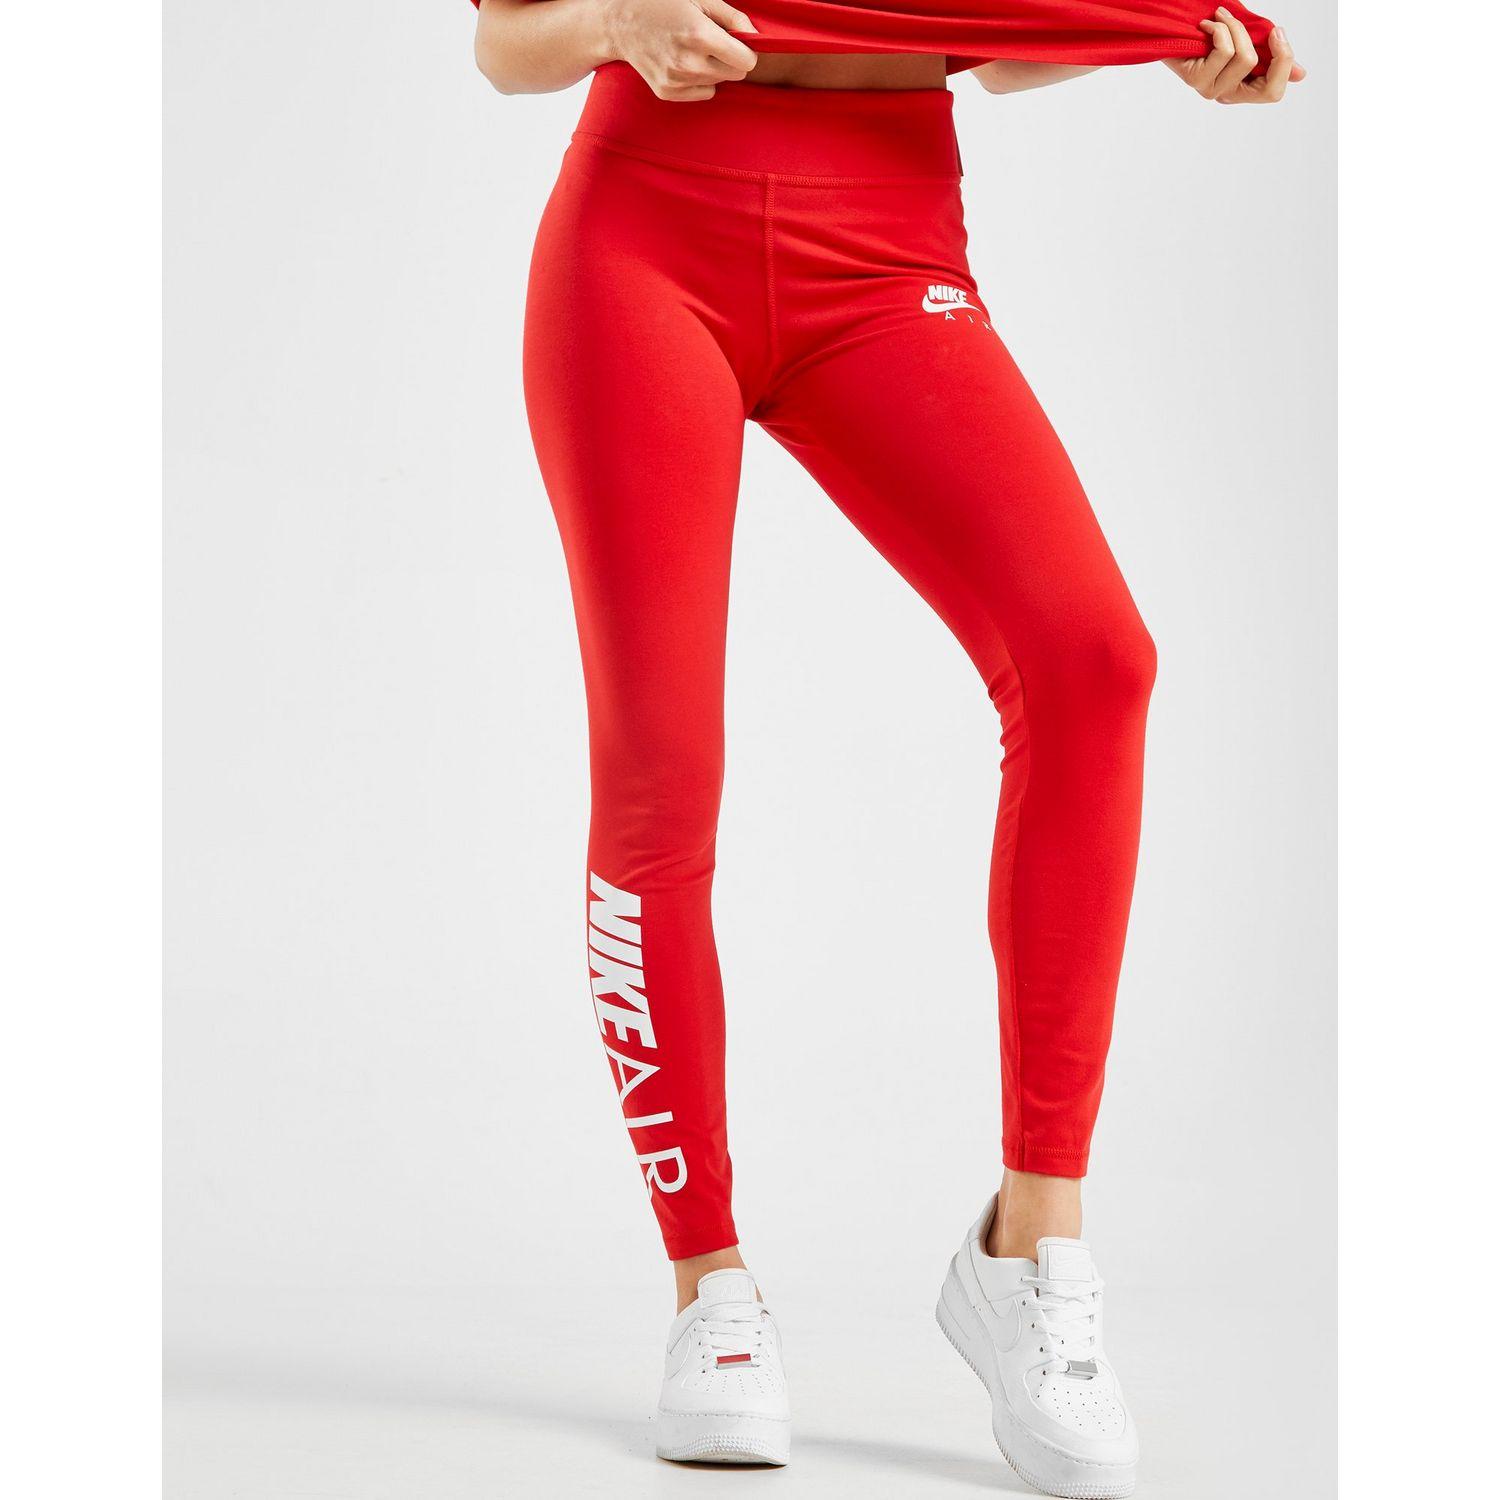 red nike tights womens